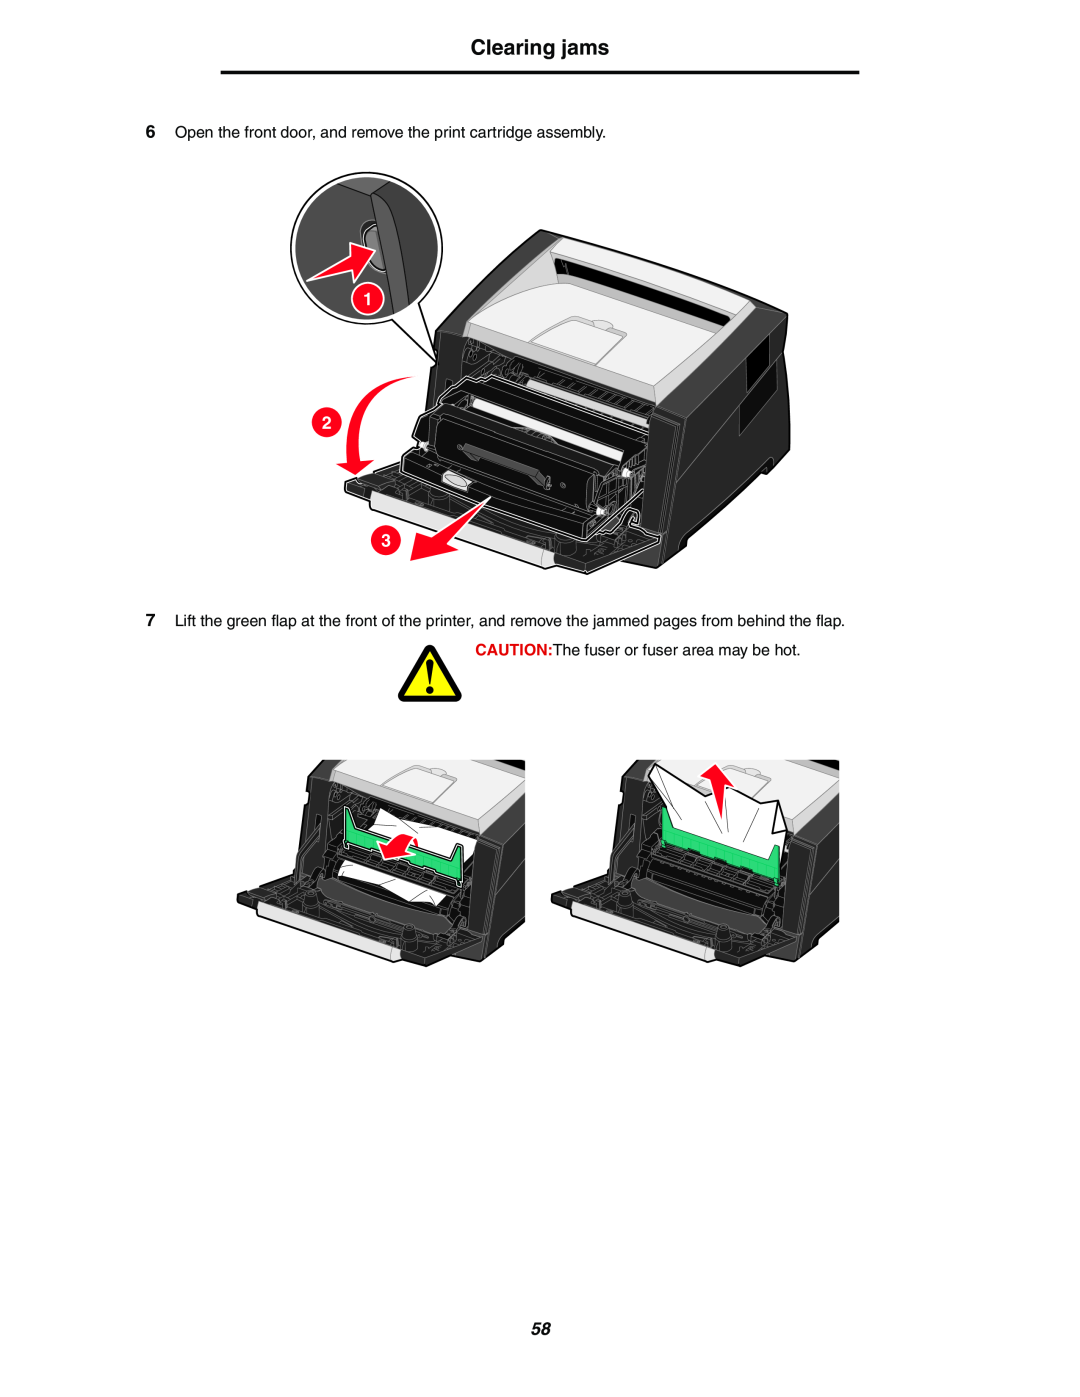 Lexmark 250dn manual Clearing jams, Open the front door, and remove the print cartridge assembly 